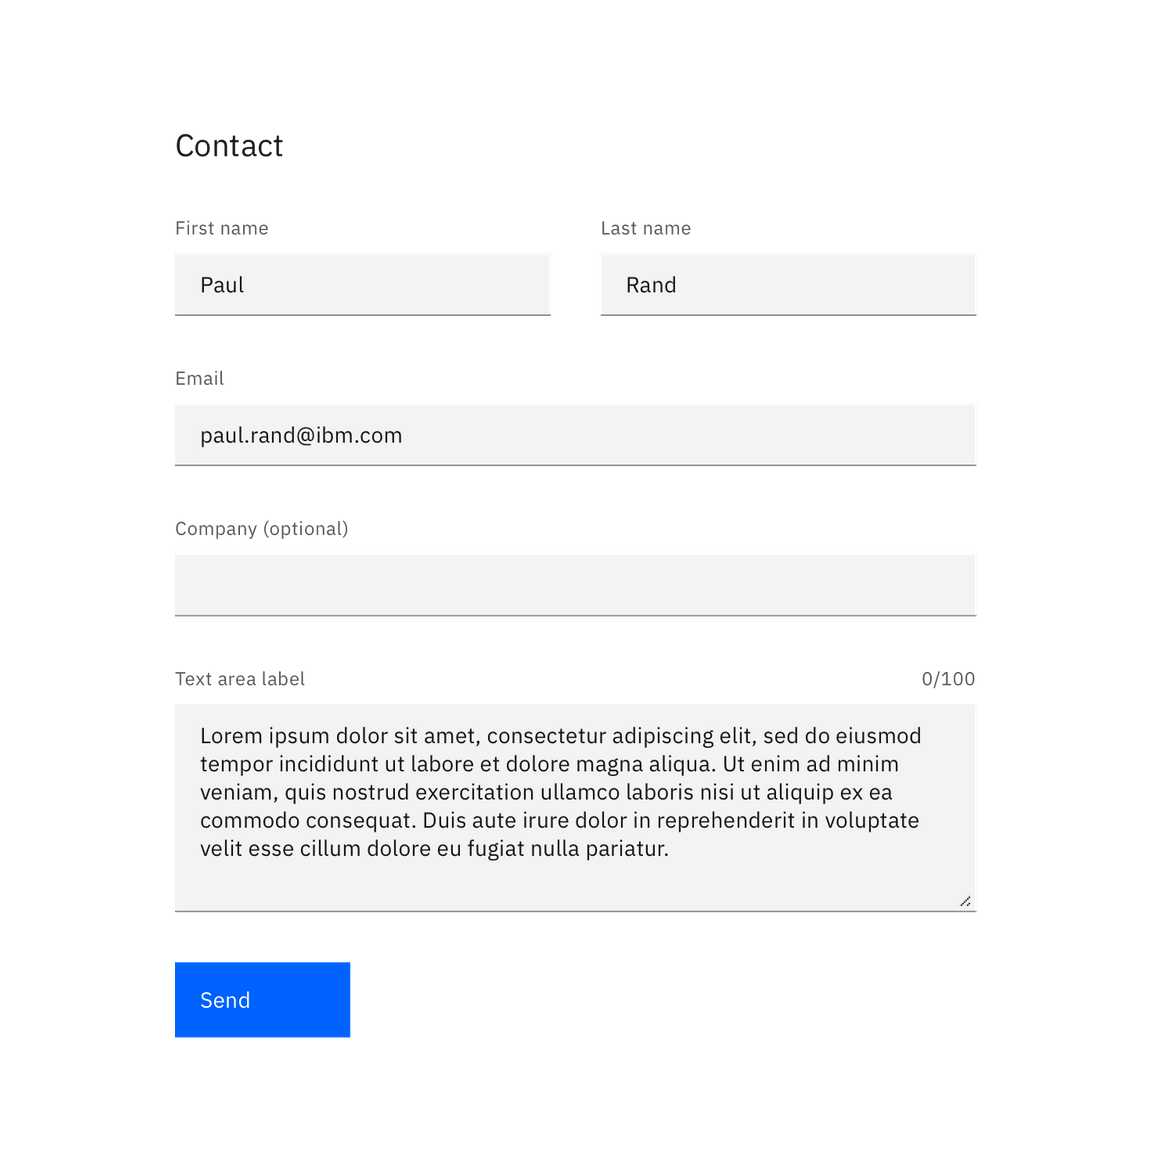 Primary button alignment in Forms